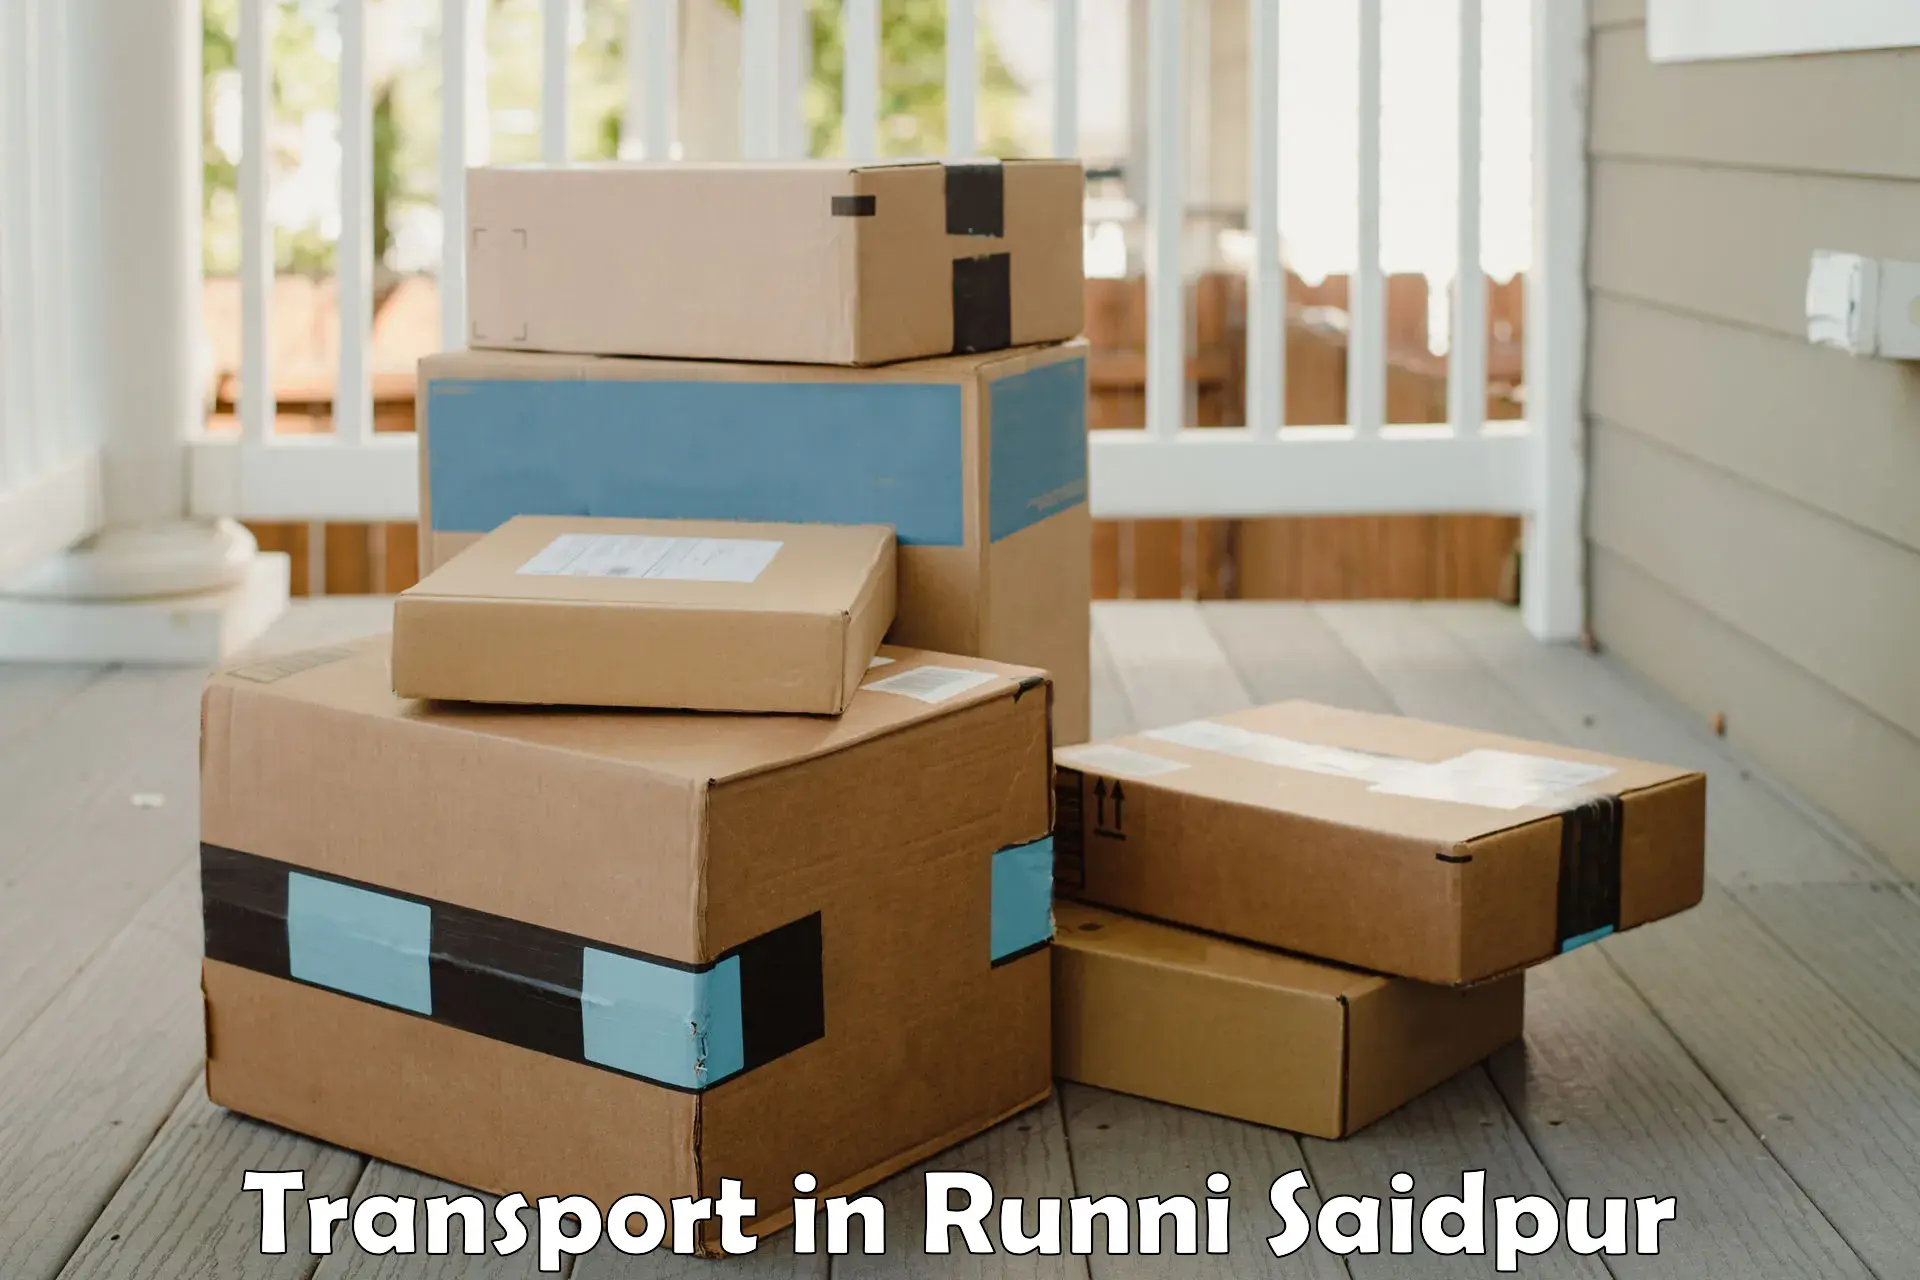 Container transportation services in Runni Saidpur